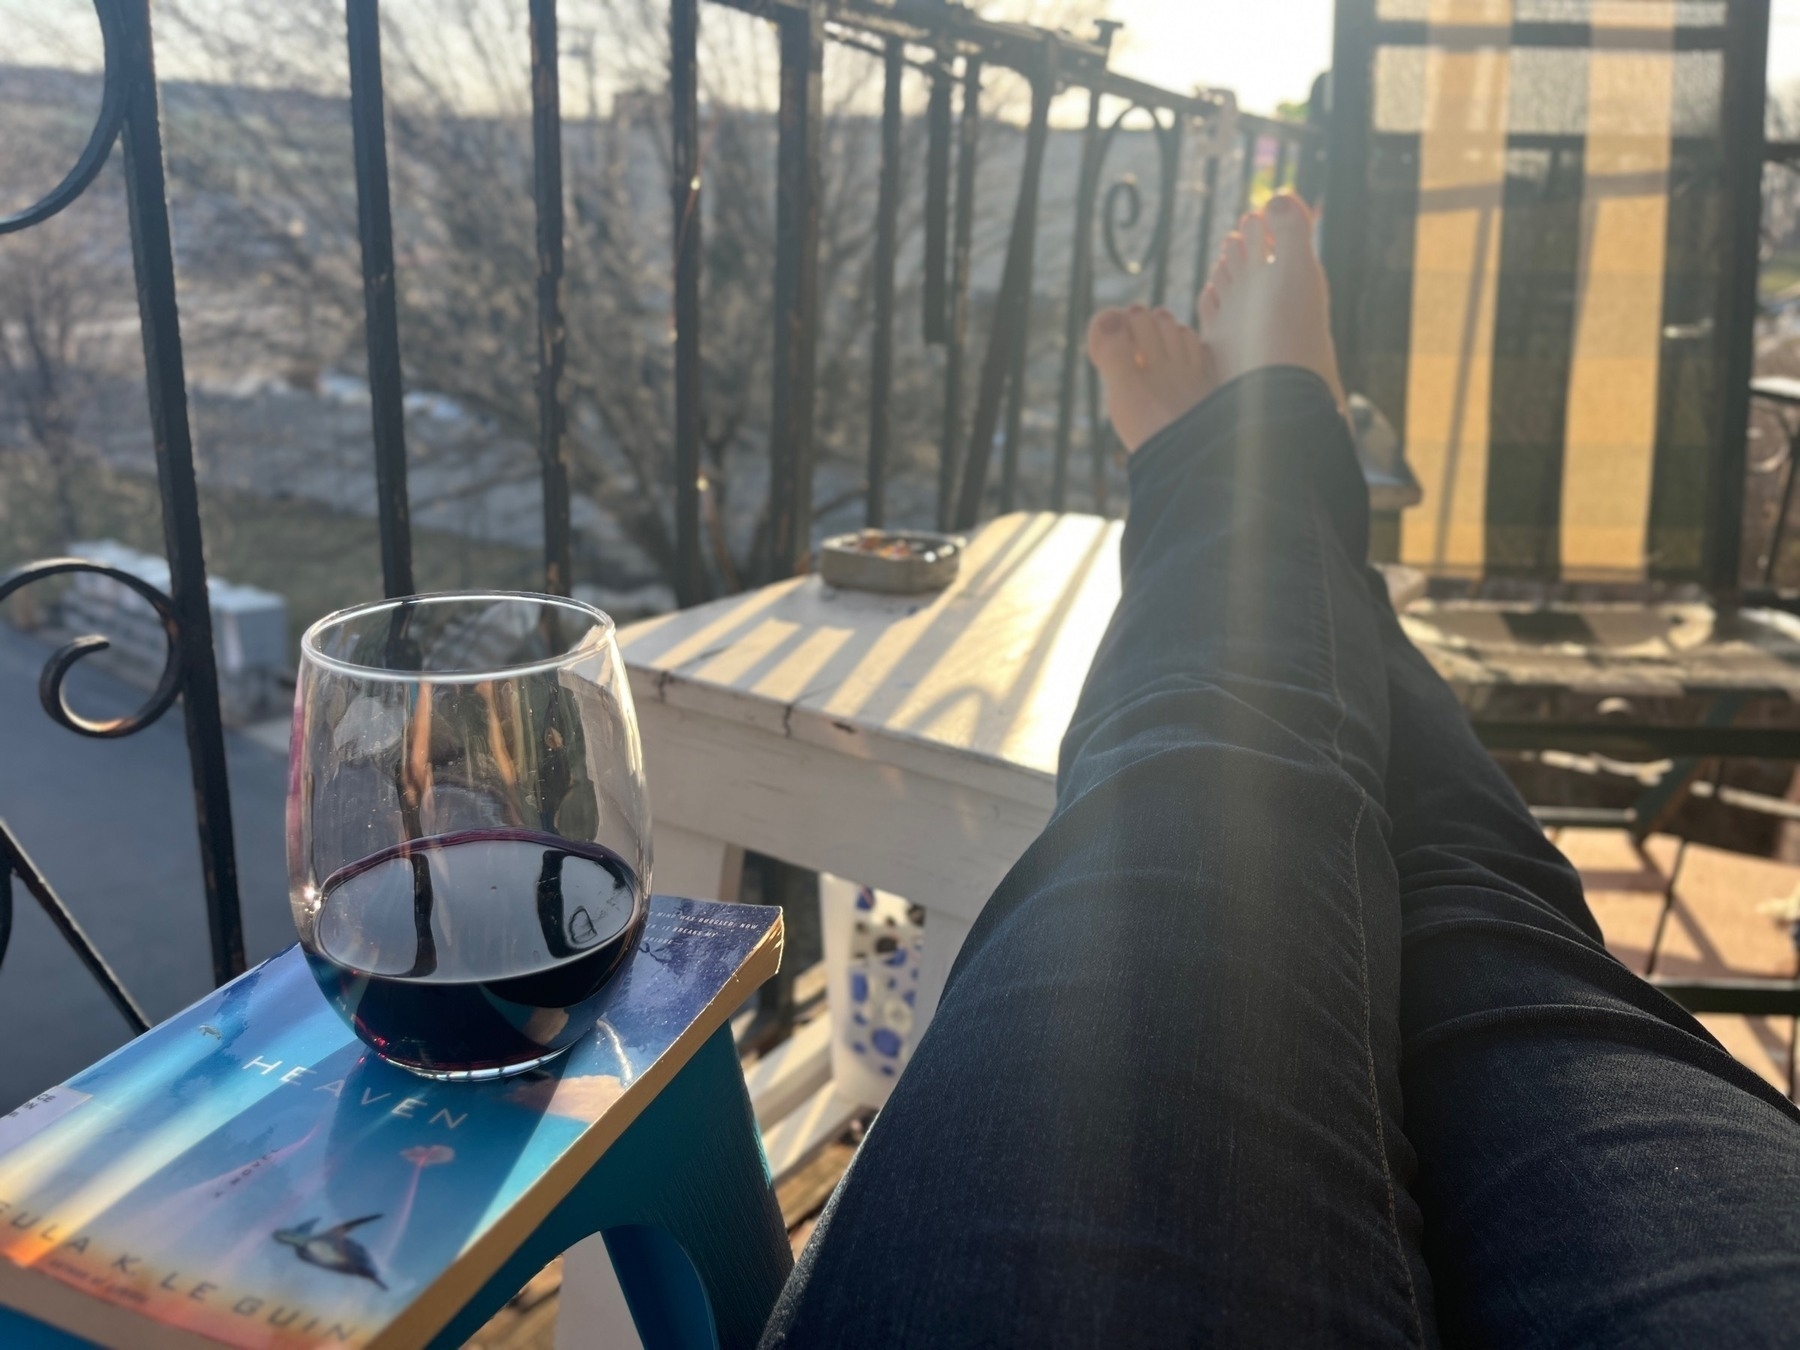 View of a glass of wine on a book and feet propped up on a balcony table 